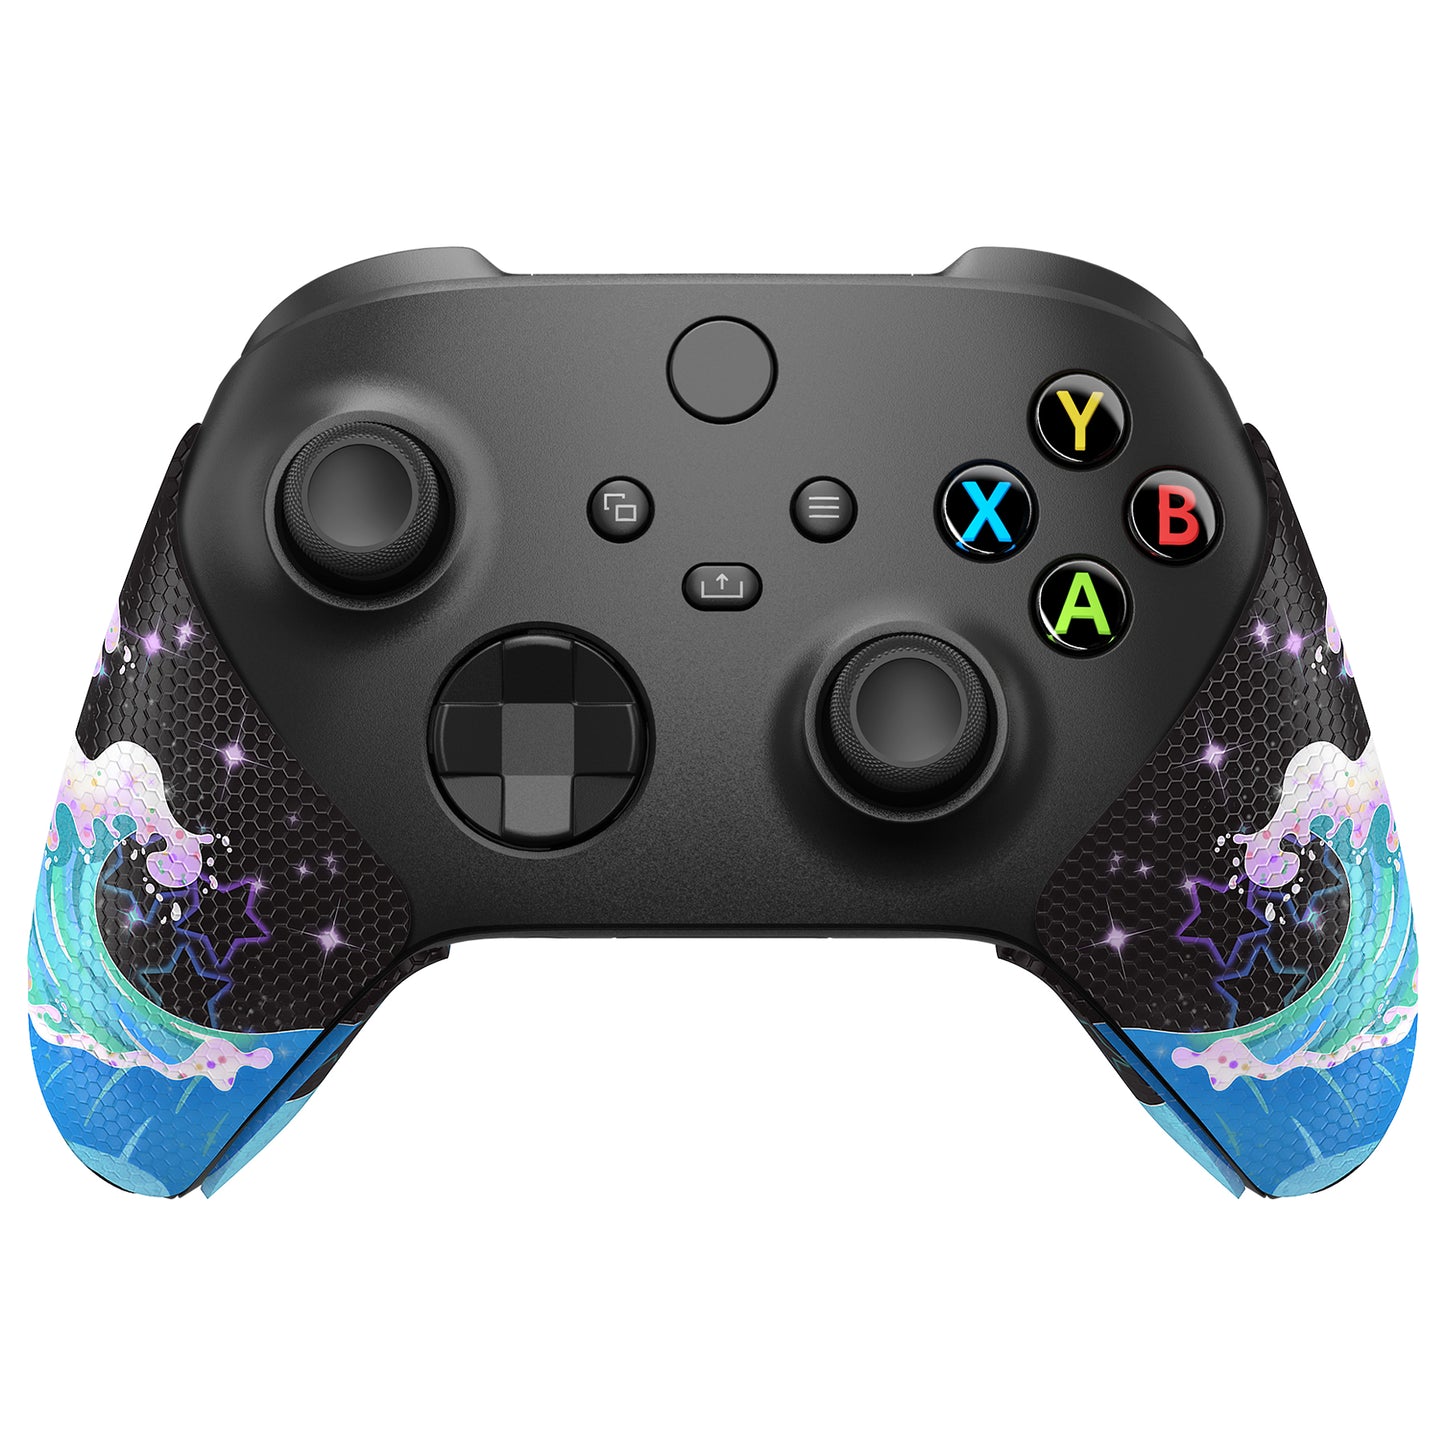 PlayVital Shimmering Waves Anti-Skid Sweat-Absorbent Controller Grip for Xbox Series X/S Controller, Professional Textured Soft Rubber Pads Handle Grips for Xbox Series X/S Controller - X3PJ032 PlayVital